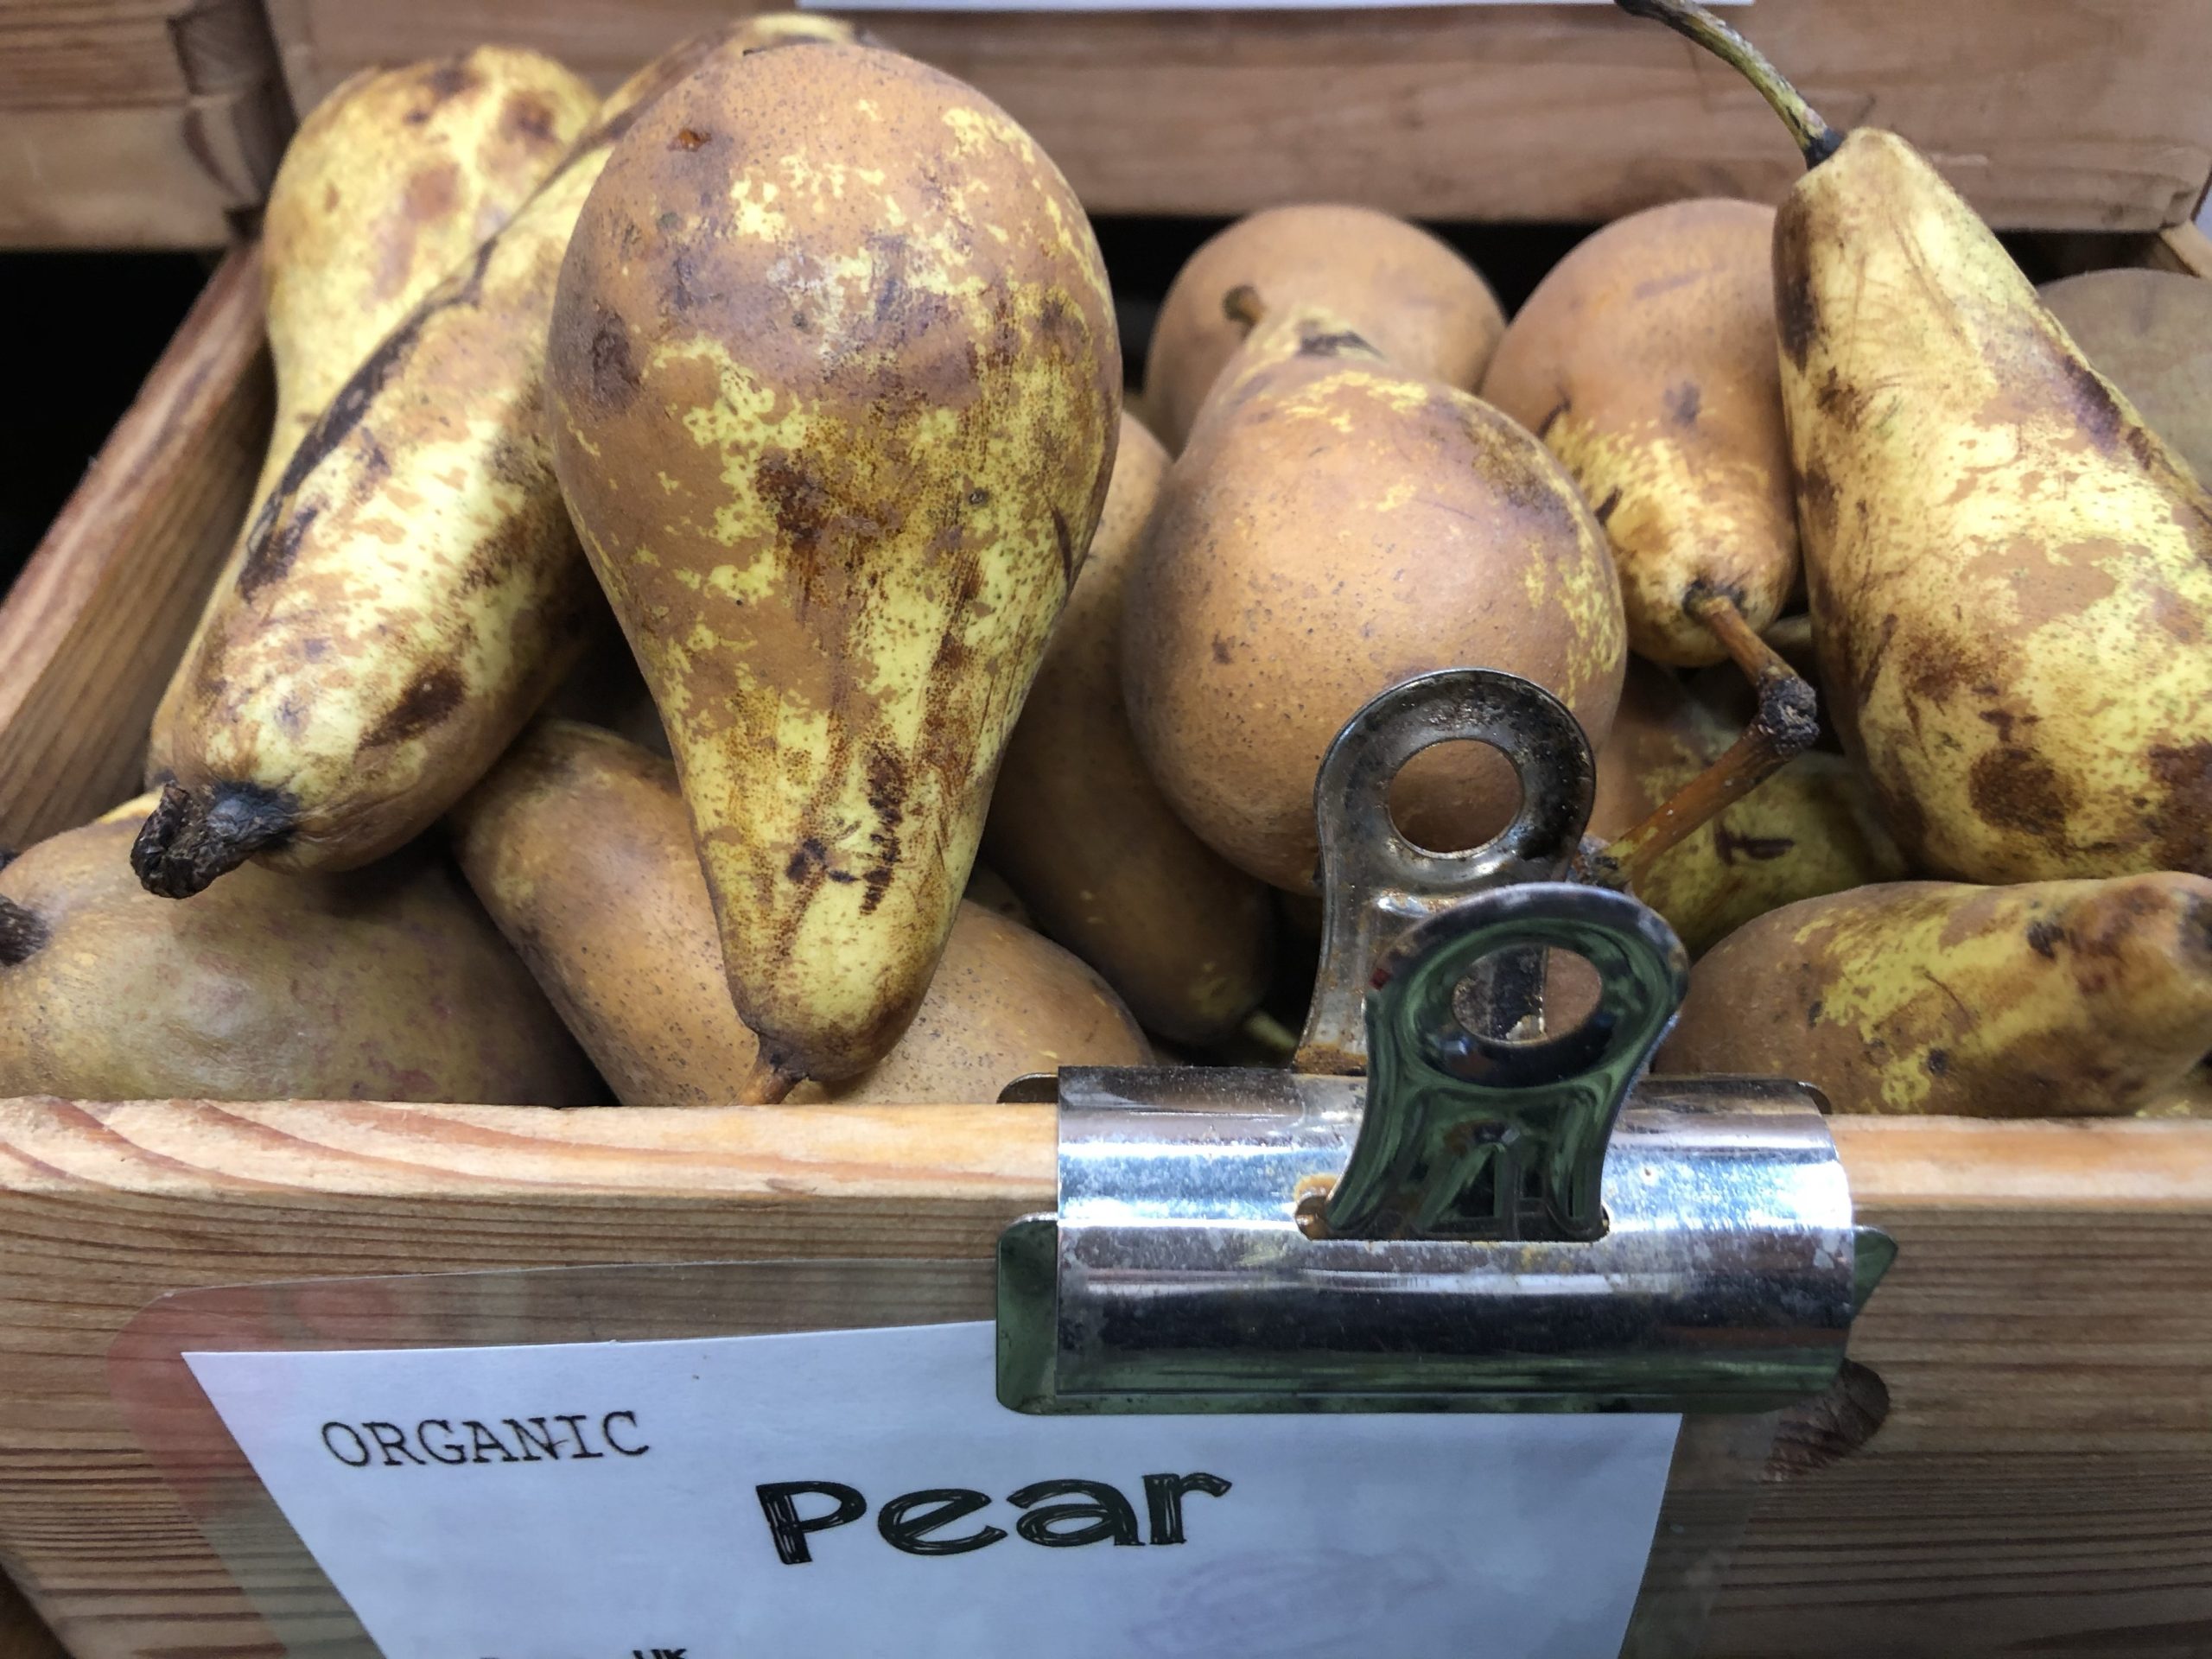 Perfectly good — is slightly bruised — pears.